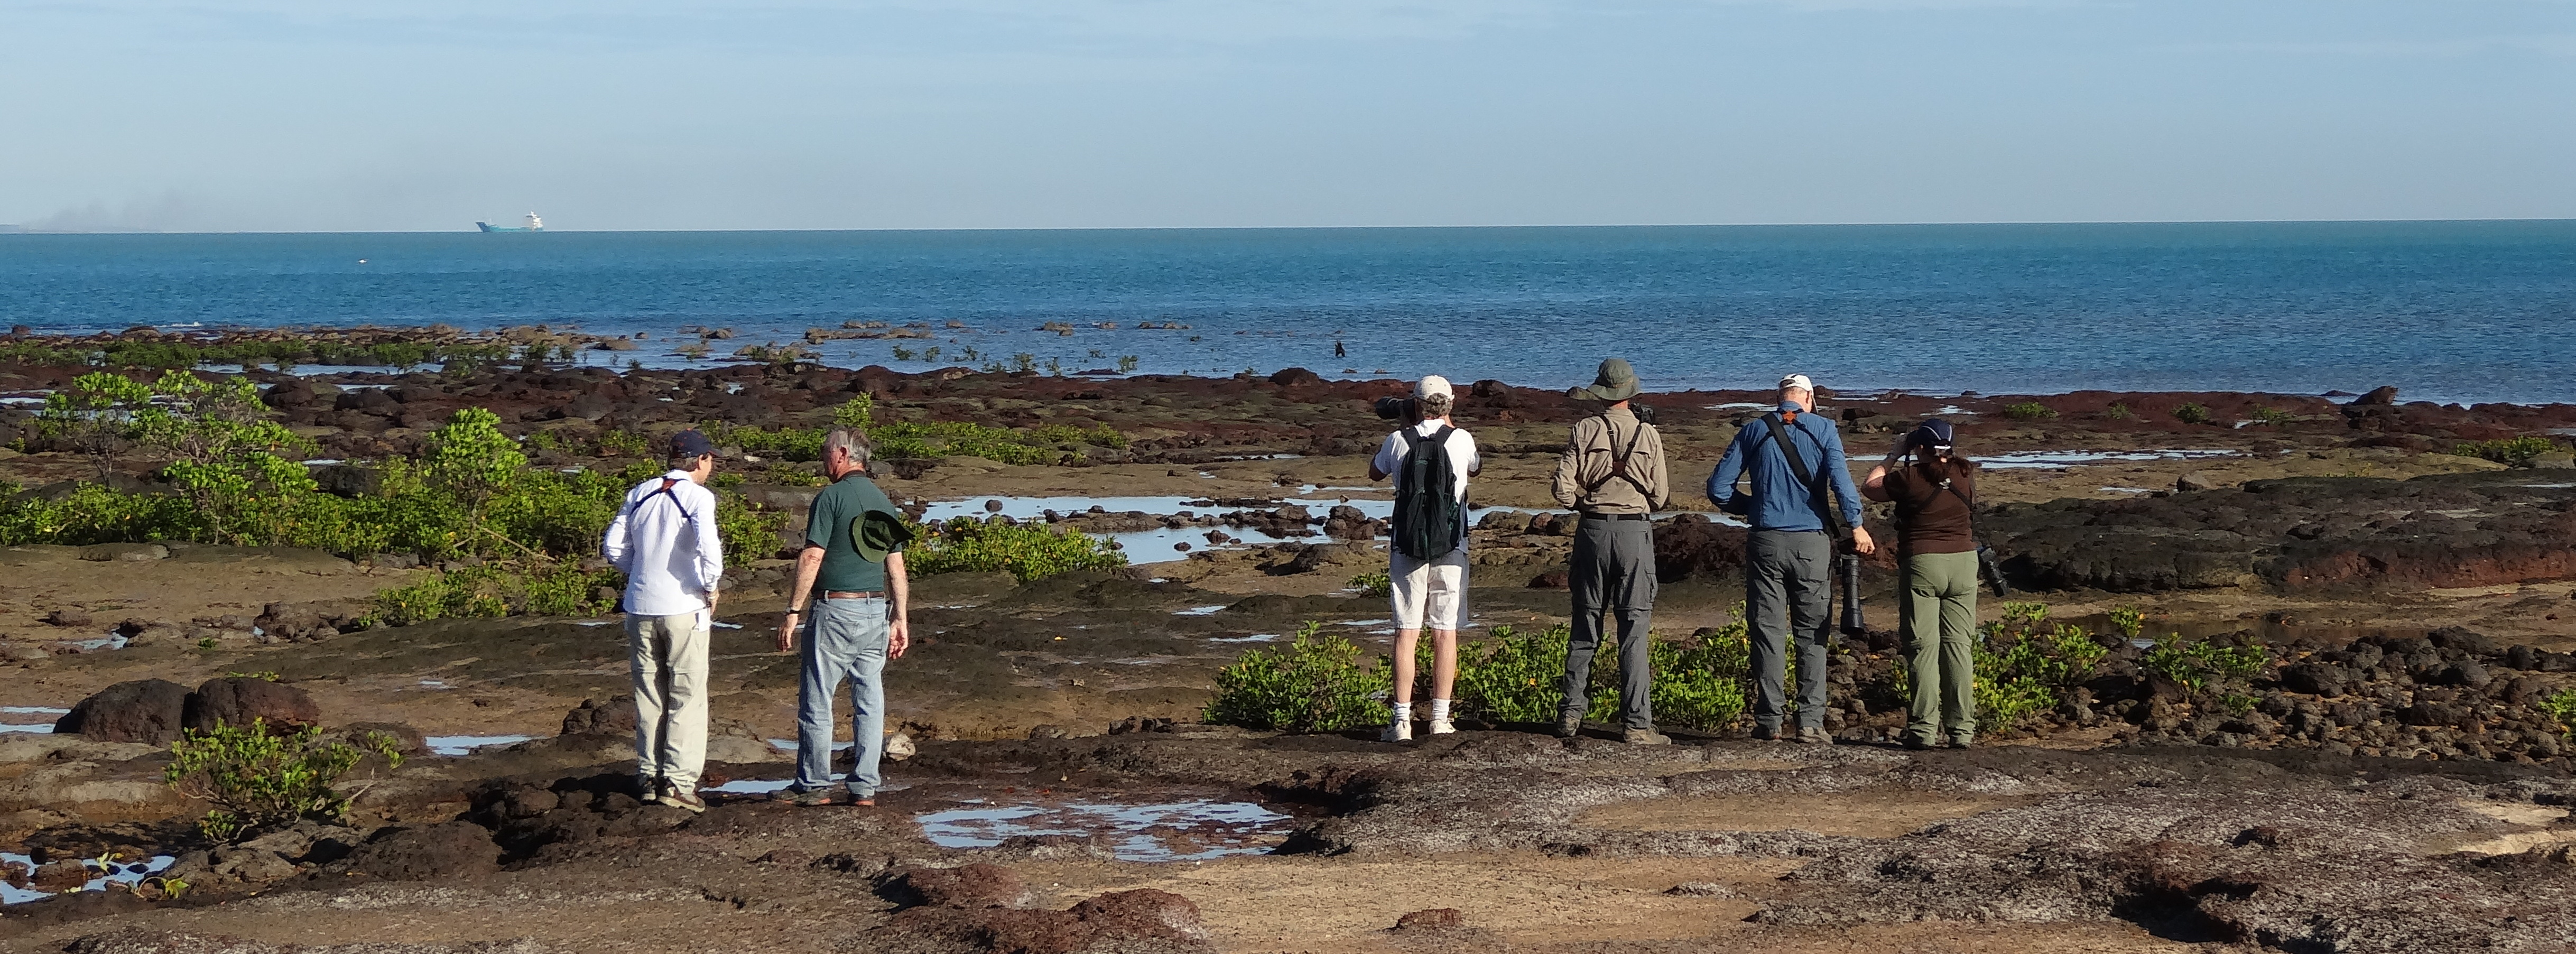 East Point rocks! Great place to see waders, only ten minutes from the centre of Darwin